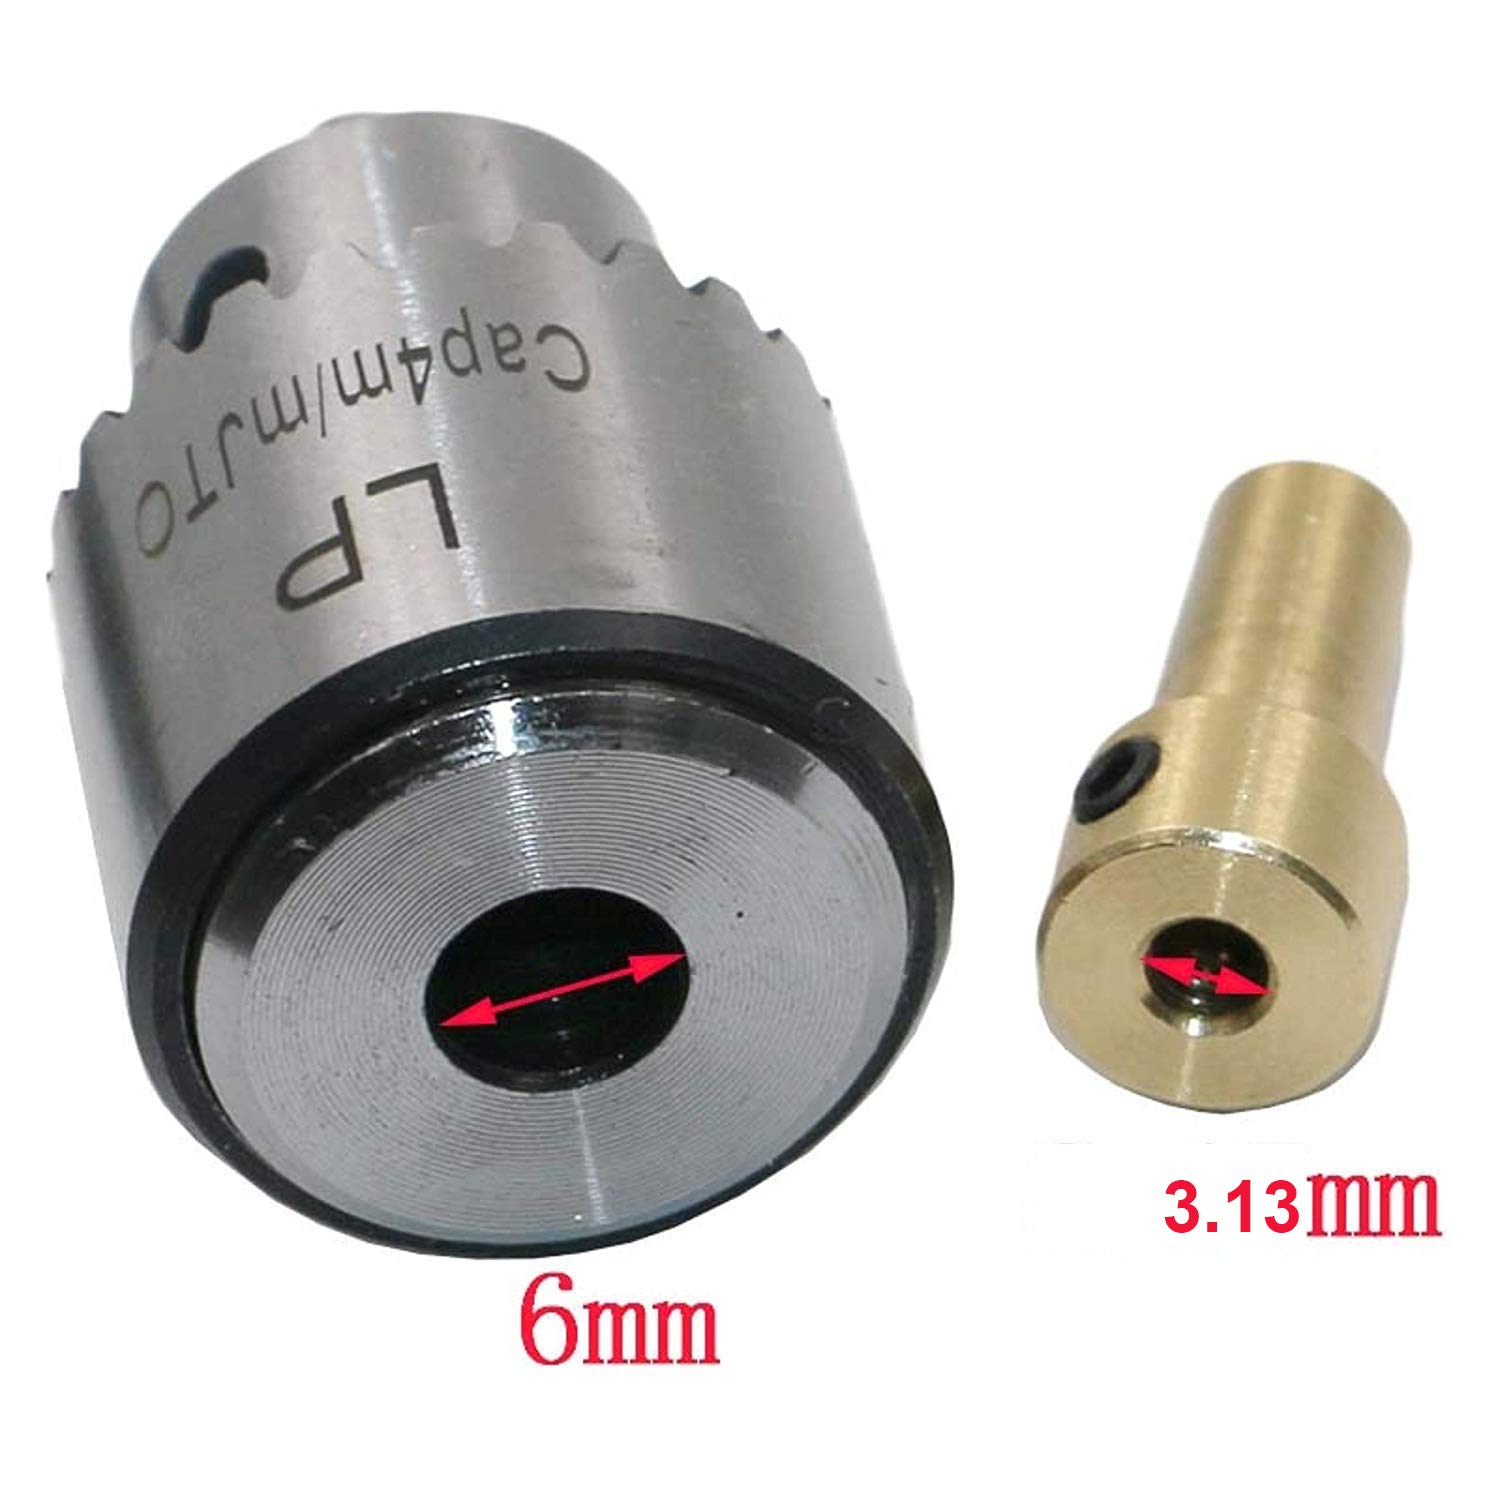 Motor Drill Chucks Clamping for 0.3-4 mm Bits (Set of 4)